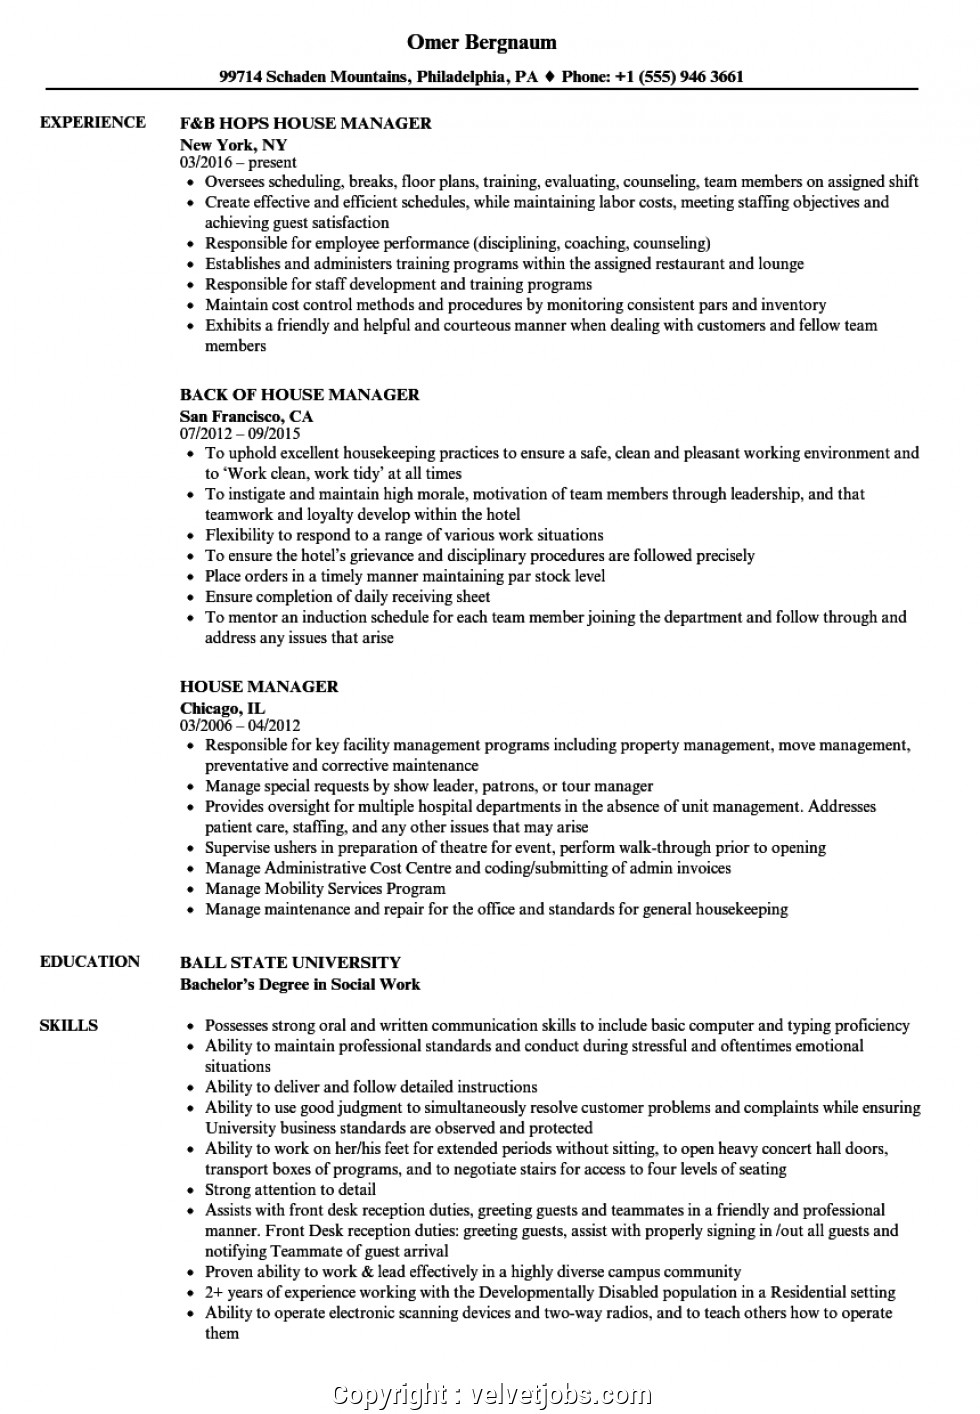 Residential Group Home Manager Sample Resume Make House Manager Resume House Manager Resume Samples